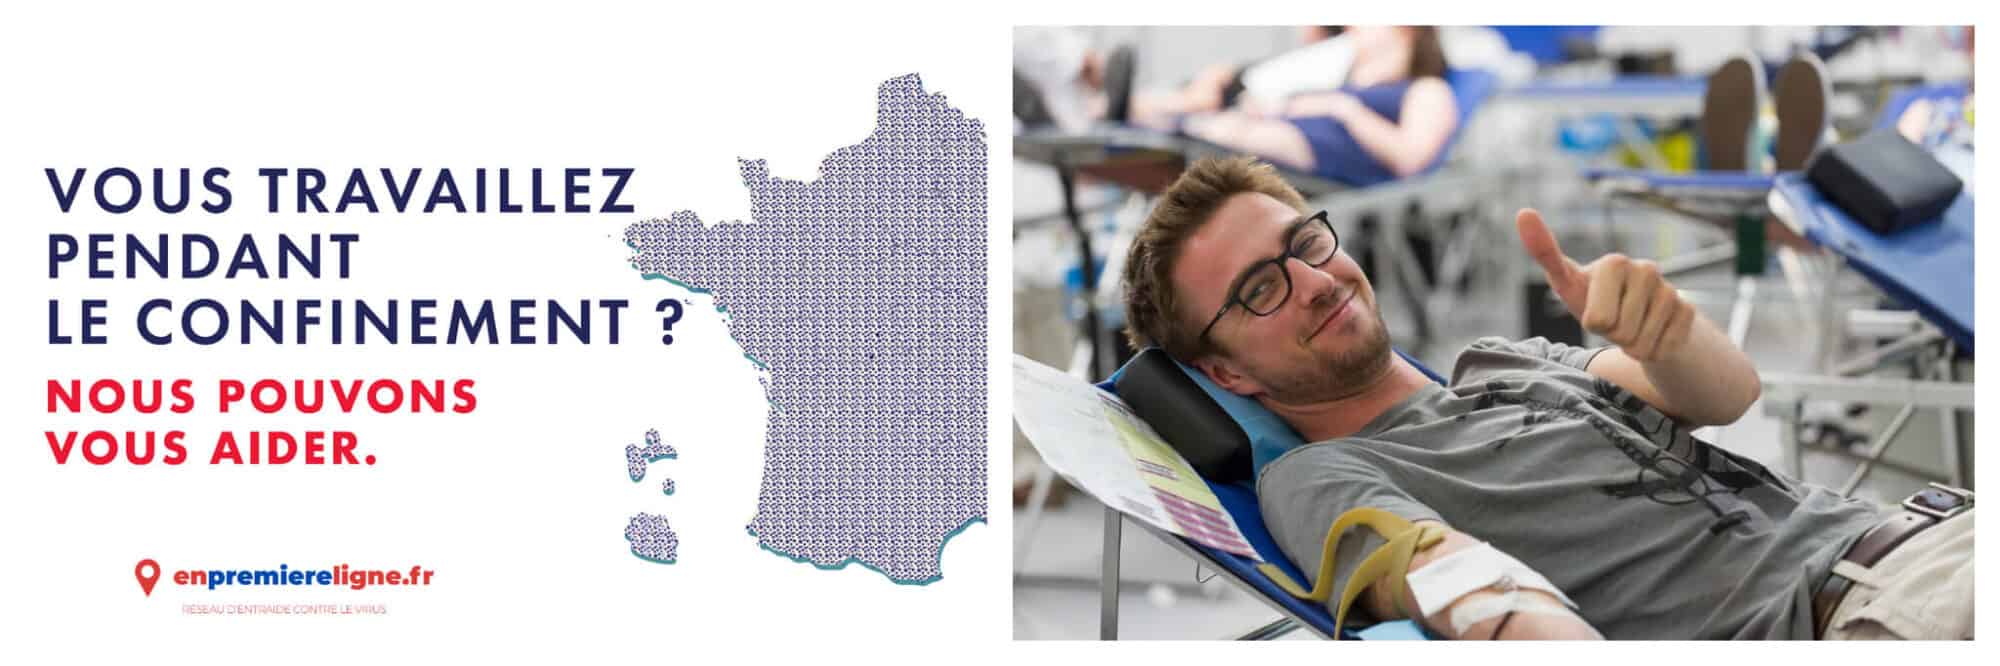 Left: An advertisement from En Premiere Ligne reads, "Vous travaillez pendant le confinement? Nous pouvons vous aider," in english, "Are you working during the confinement? We can help you." Right: A man in a light gray t-shirt and glasses lays down while he donates blood, he smiles and gestures a thumbs-up at the camera